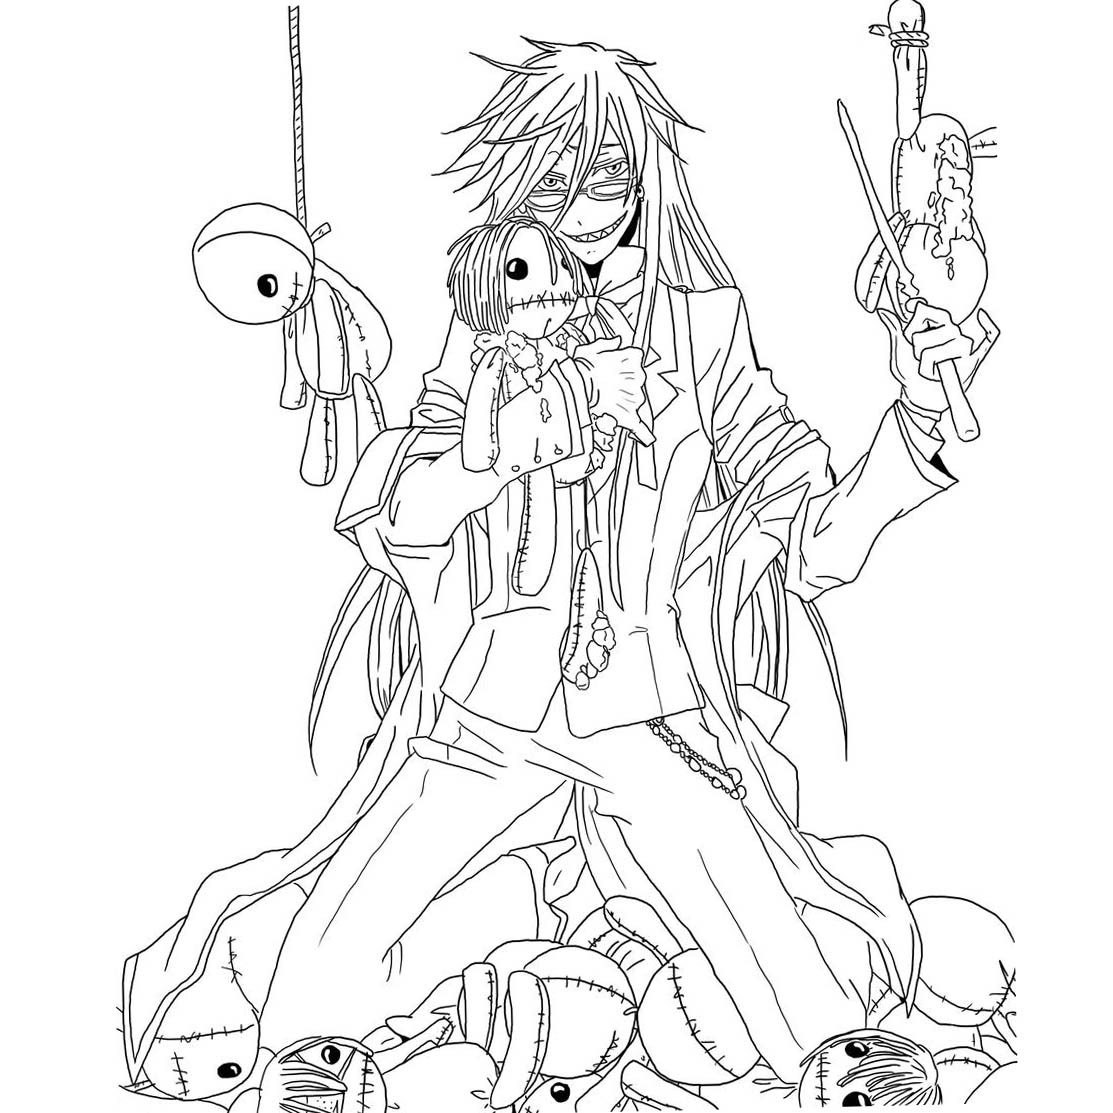 Free Black Butler Coloring Pages Grell Sutcliff and Dolls printable